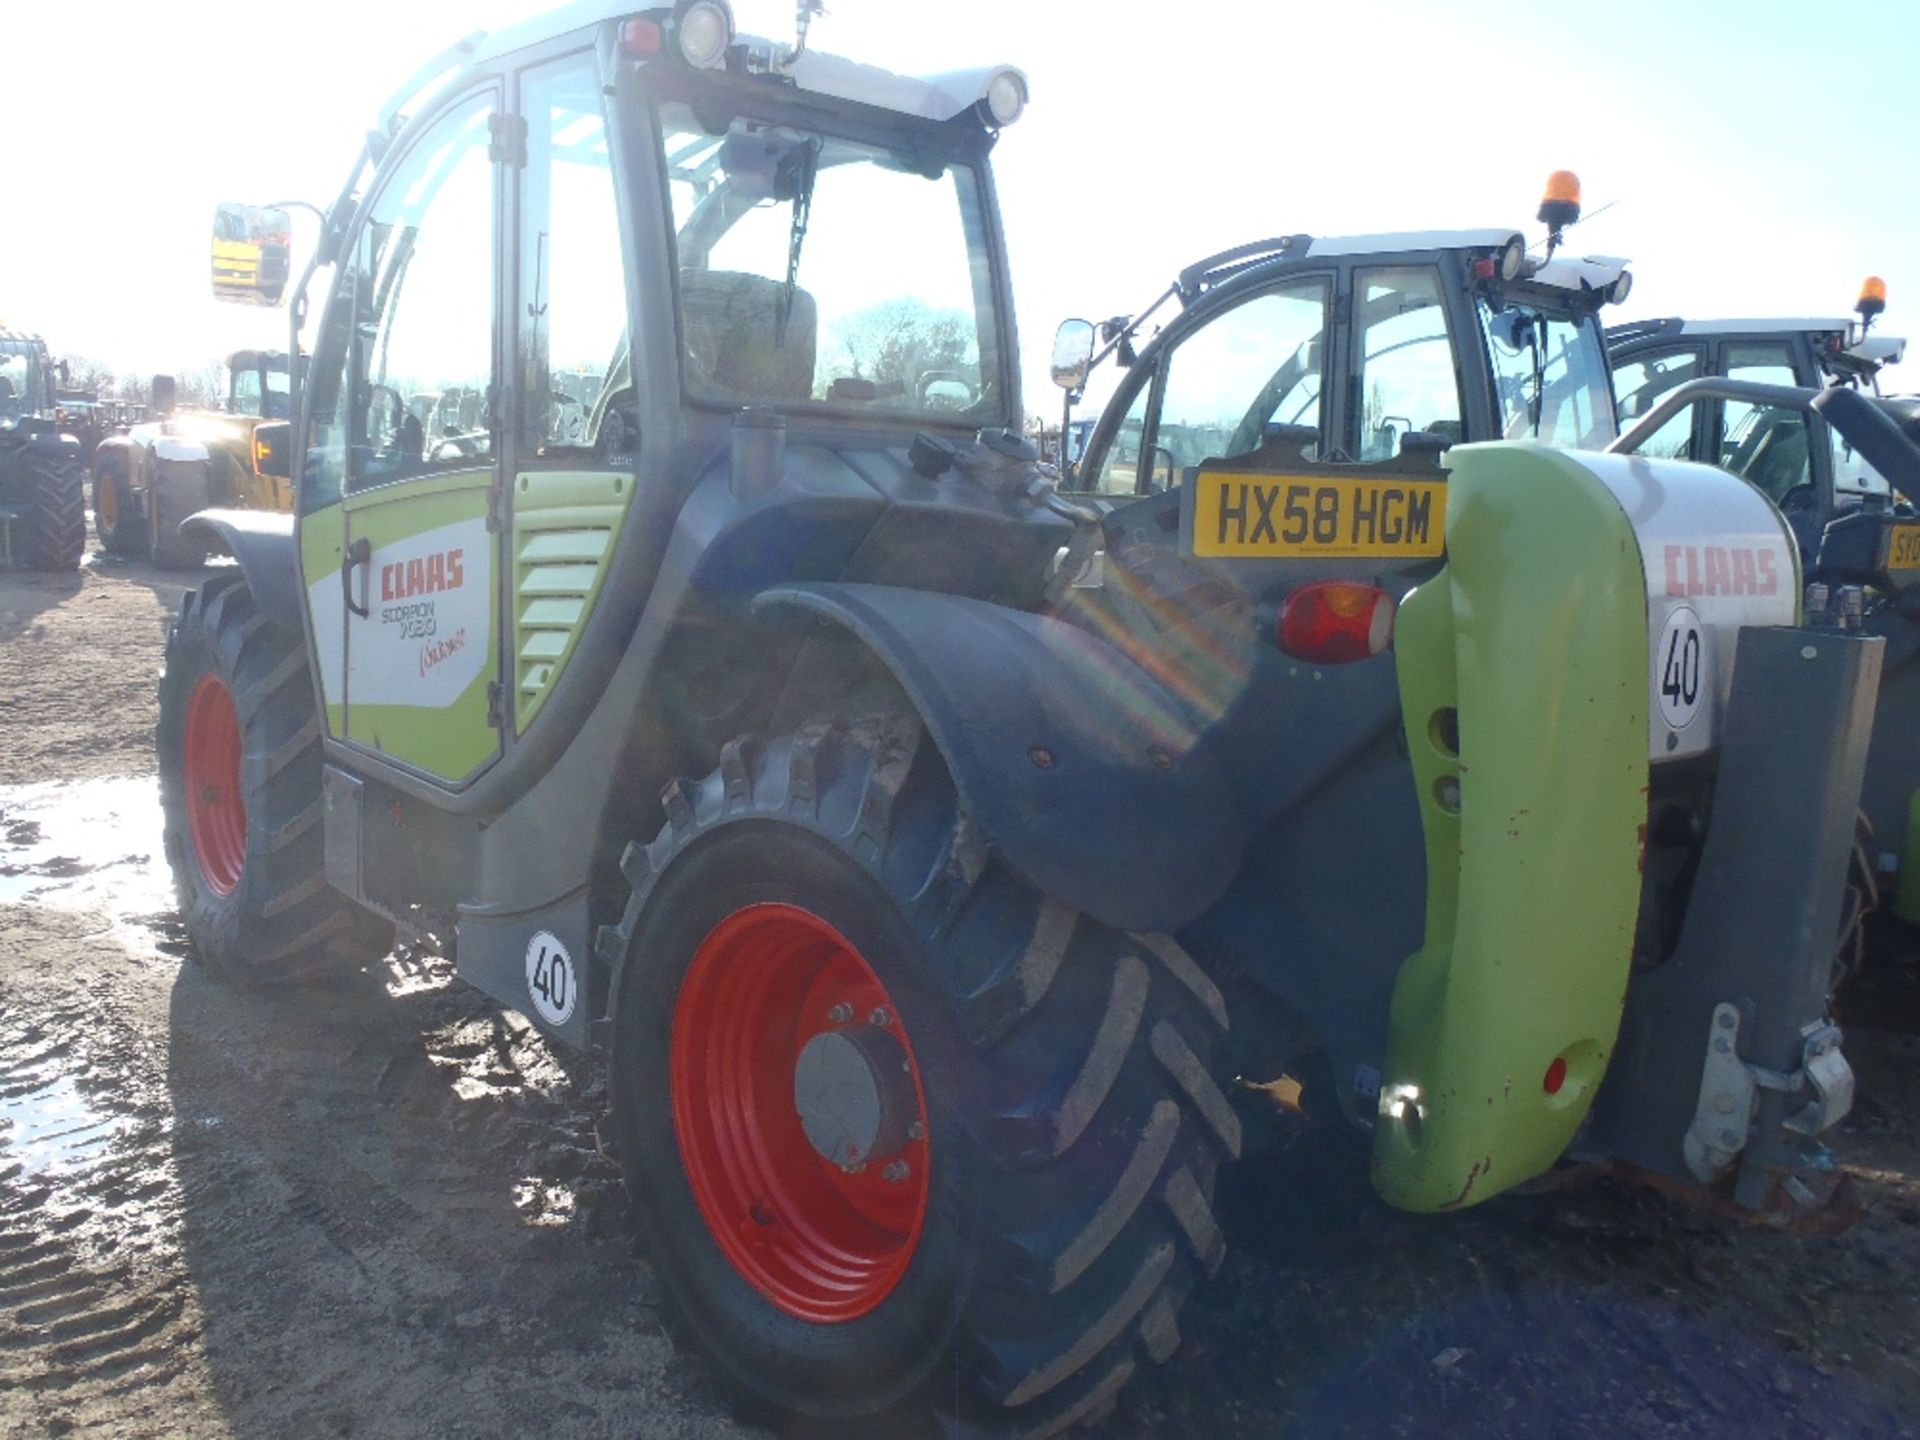 2009 Claas Scorpion 7030 3.5 Ton 7m Telehandler with Pick Up Hitch, Boom Suspension, JCB Headstock - Image 5 of 6